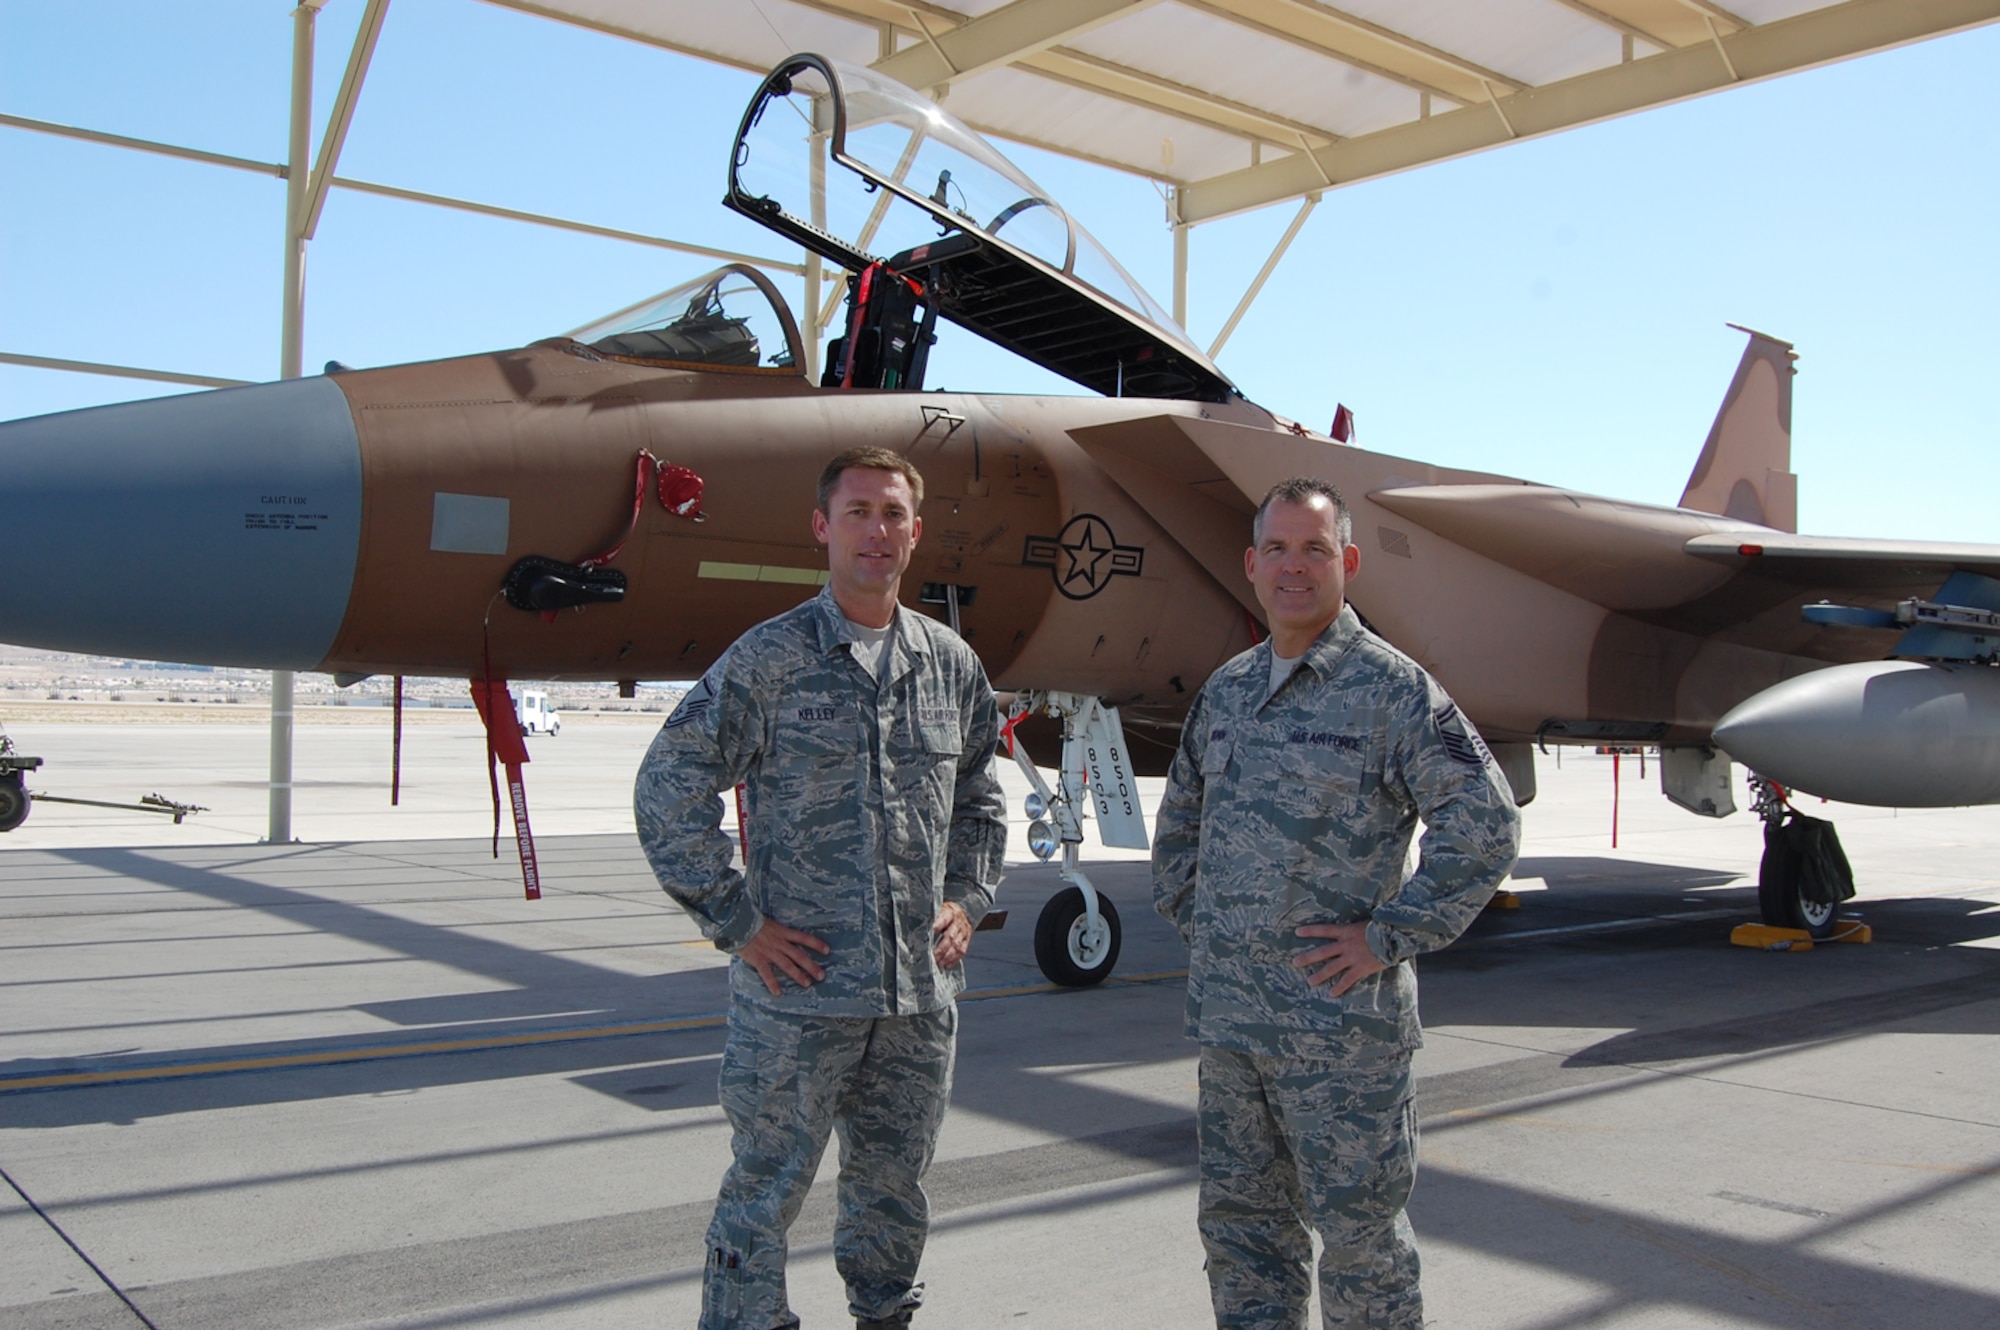 From left, Master Sgt. Kelley and Senior Master Sgt. Brunin are both maintainers with the 926th Aircraft Maintenance Squadron. They were recognized for a "job well done" during a recent dissimilar air combat training, or DACT, exercise that took place in Holloman Air Force Base, N.M. Sergeant Brunin is the production superintendent, and Sergeant Kelley is an expeditor with the 926th AMXS. Through the Air Force's Total Force Integration initiative, both Air Reserve Technicians are integrated in the Flanker Aircraft Maintenance Unit, a Regular Air Force unit here.